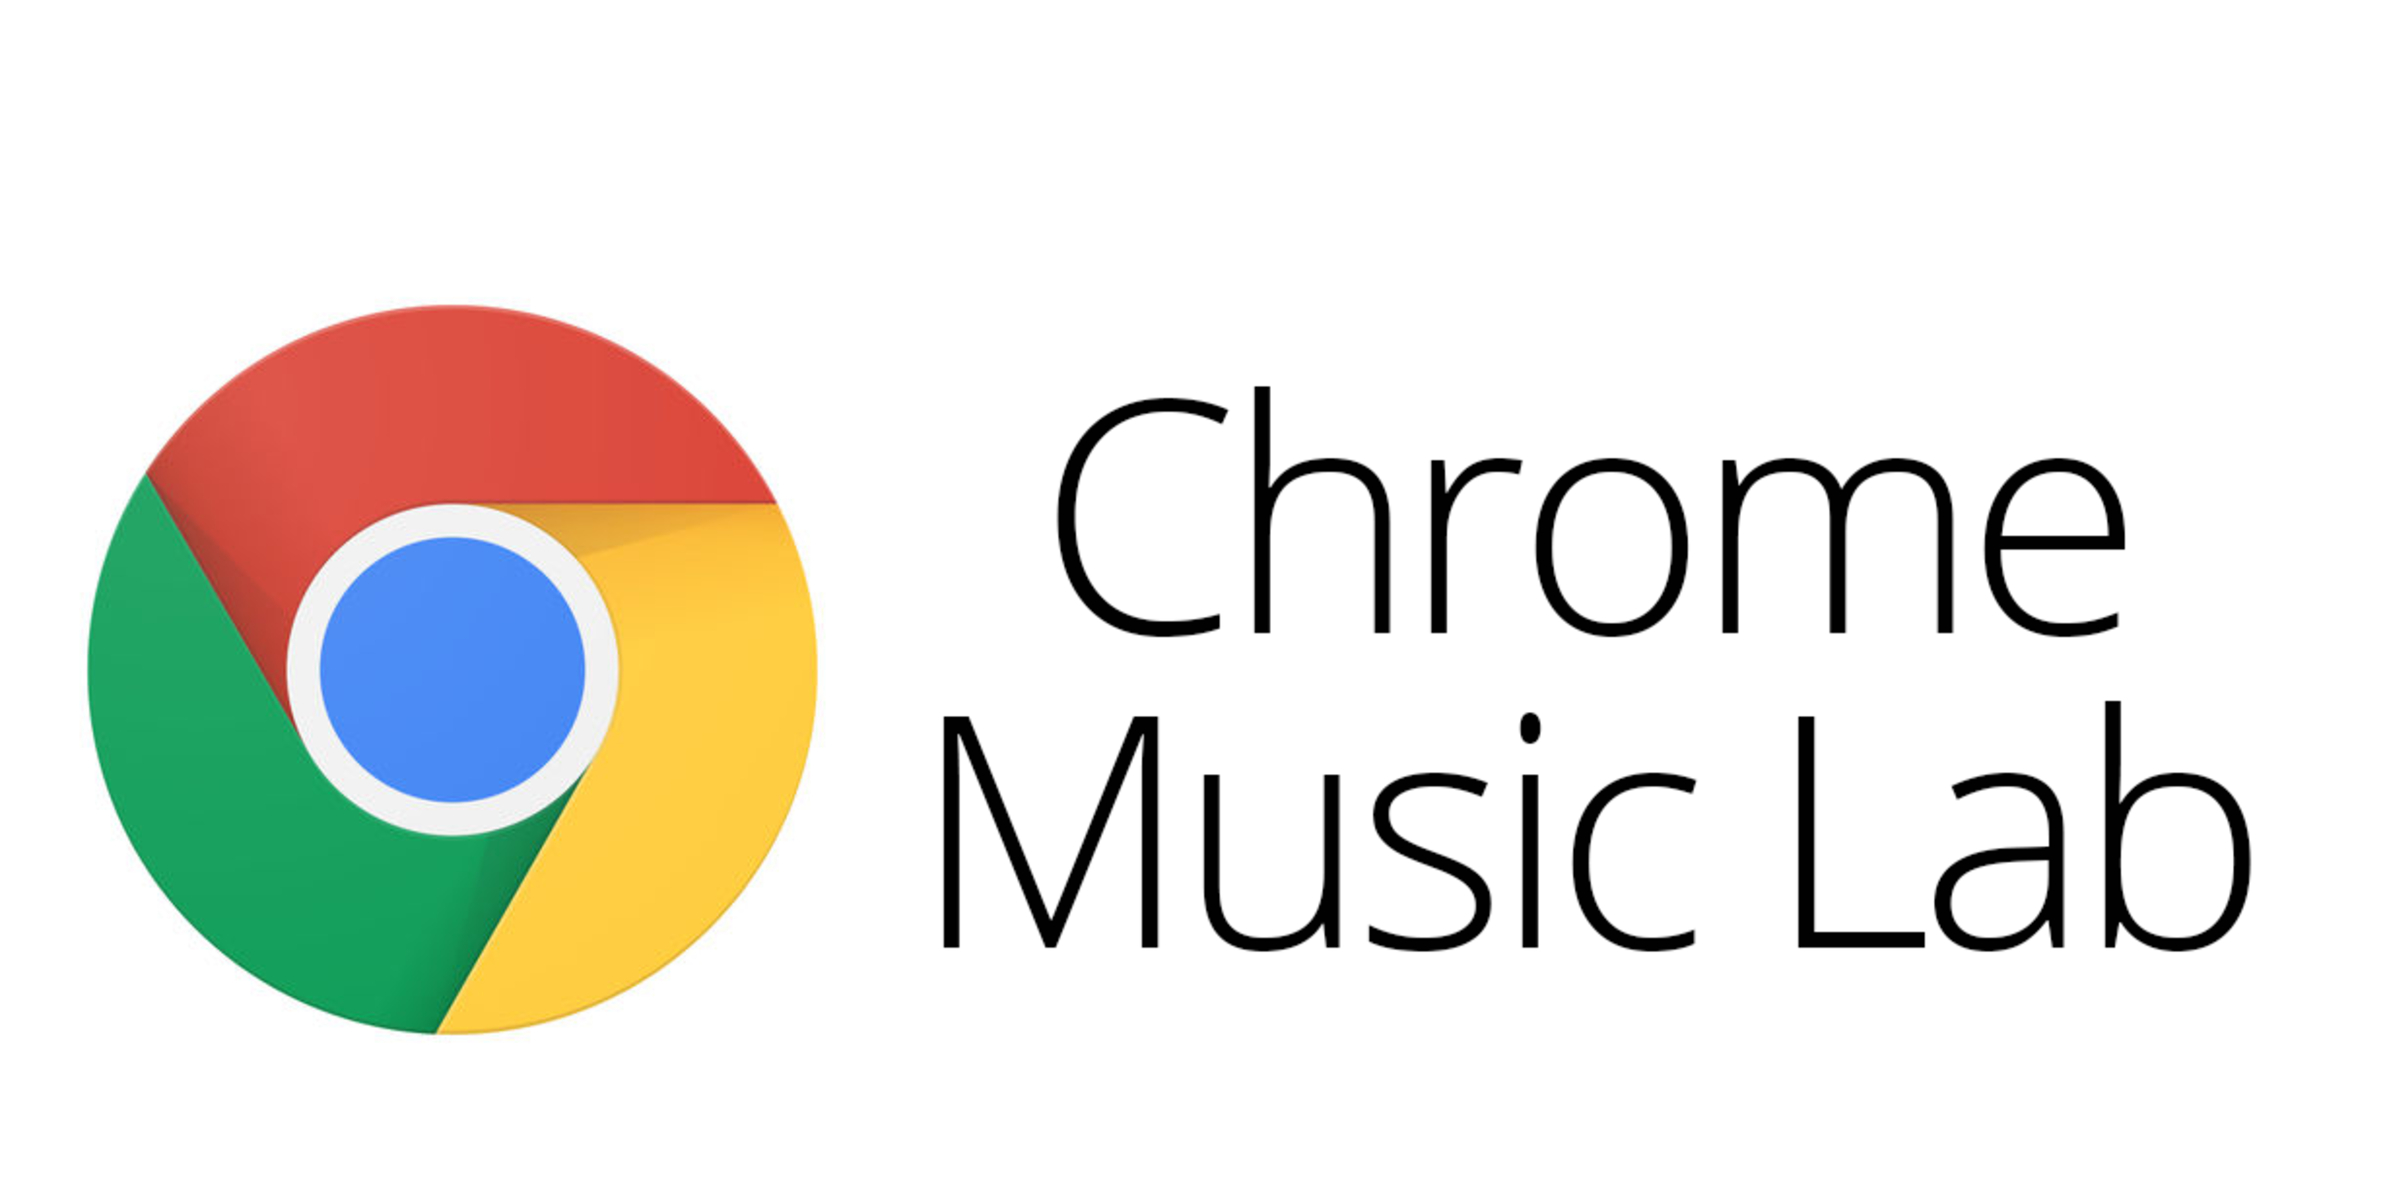 How To Use Chrome Music Lab